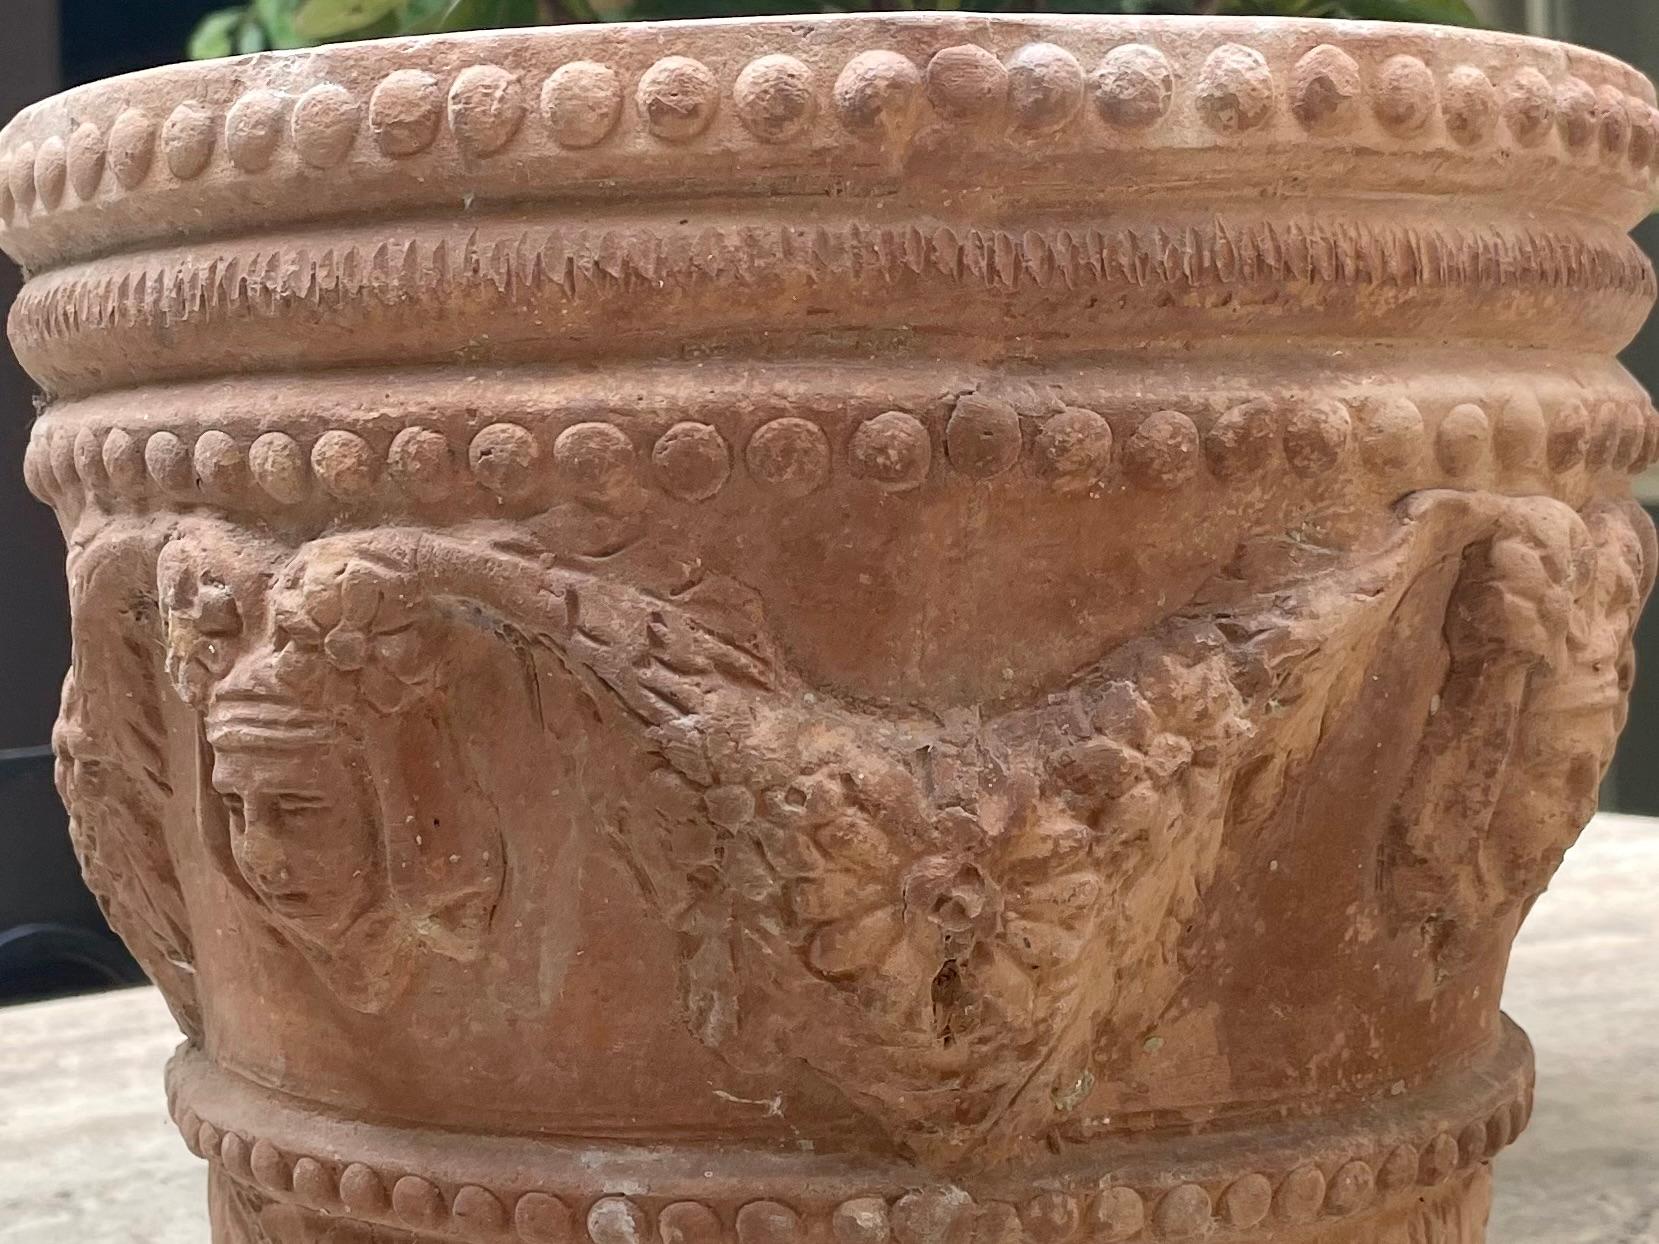 Hand-Crafted Neoclassical Terracotta Planter For Sale